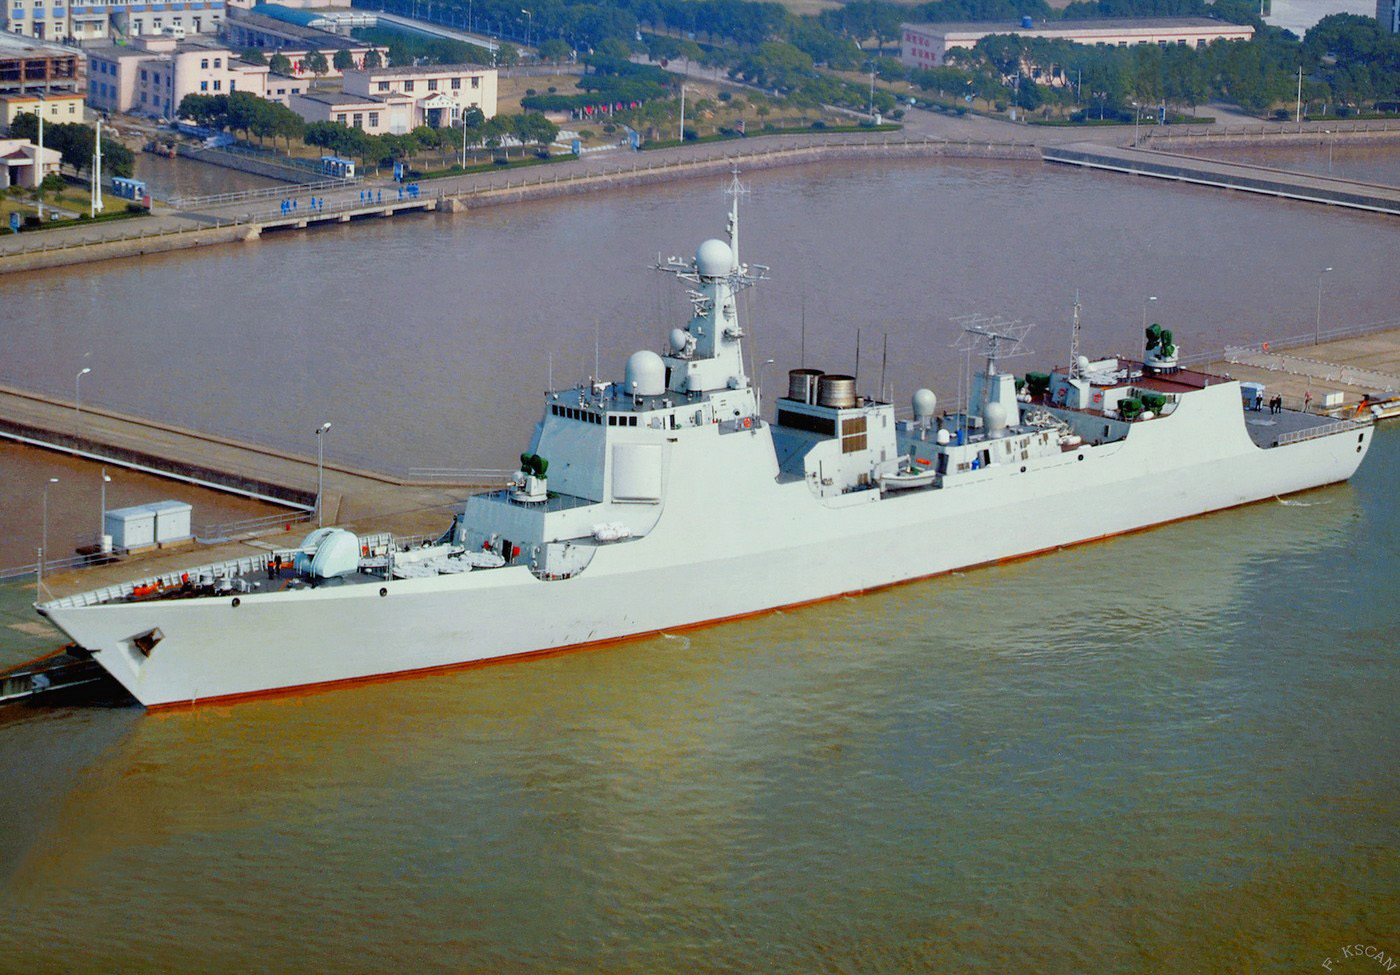 NEW+Type+052C+HHQ-9+destroyer+Luyang+II+class+Lanzhou+People%2527s+Liberation+Army+Navy+china+Active+Electronically+Scanned+Array%2528AESA%2529+Type+730+CIWS+C-805+602+anti-ship+land+attack+cruise+missiles+171234+%25281%2529.jpg